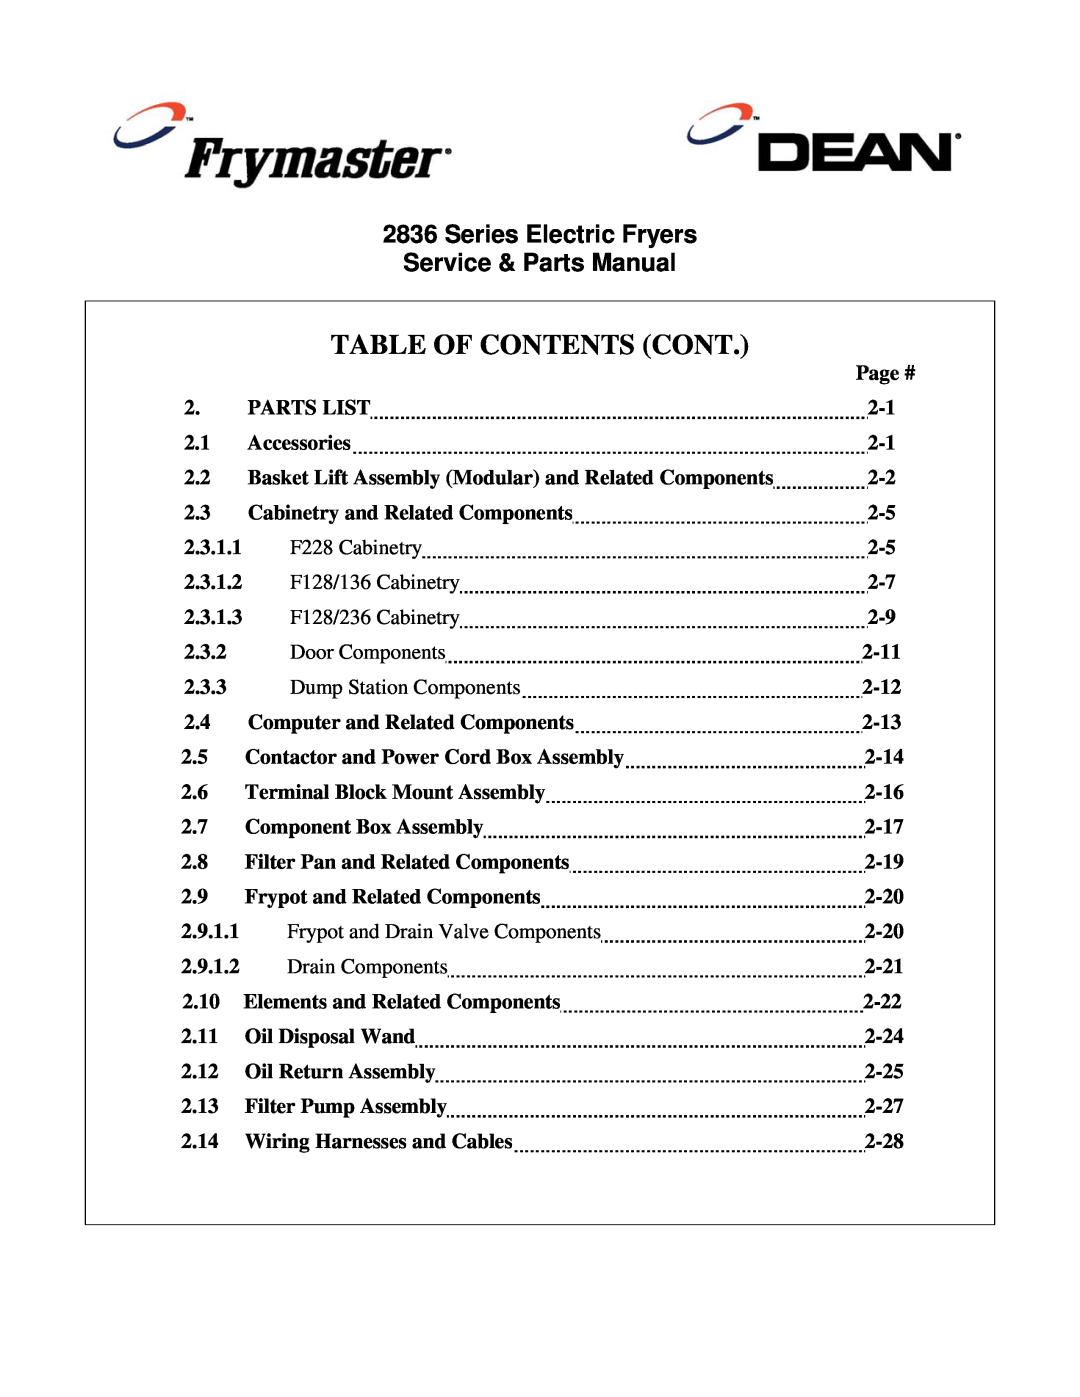 Frymaster 2836 manual Table Of Contents Cont, Series Electric Fryers Service & Parts Manual 